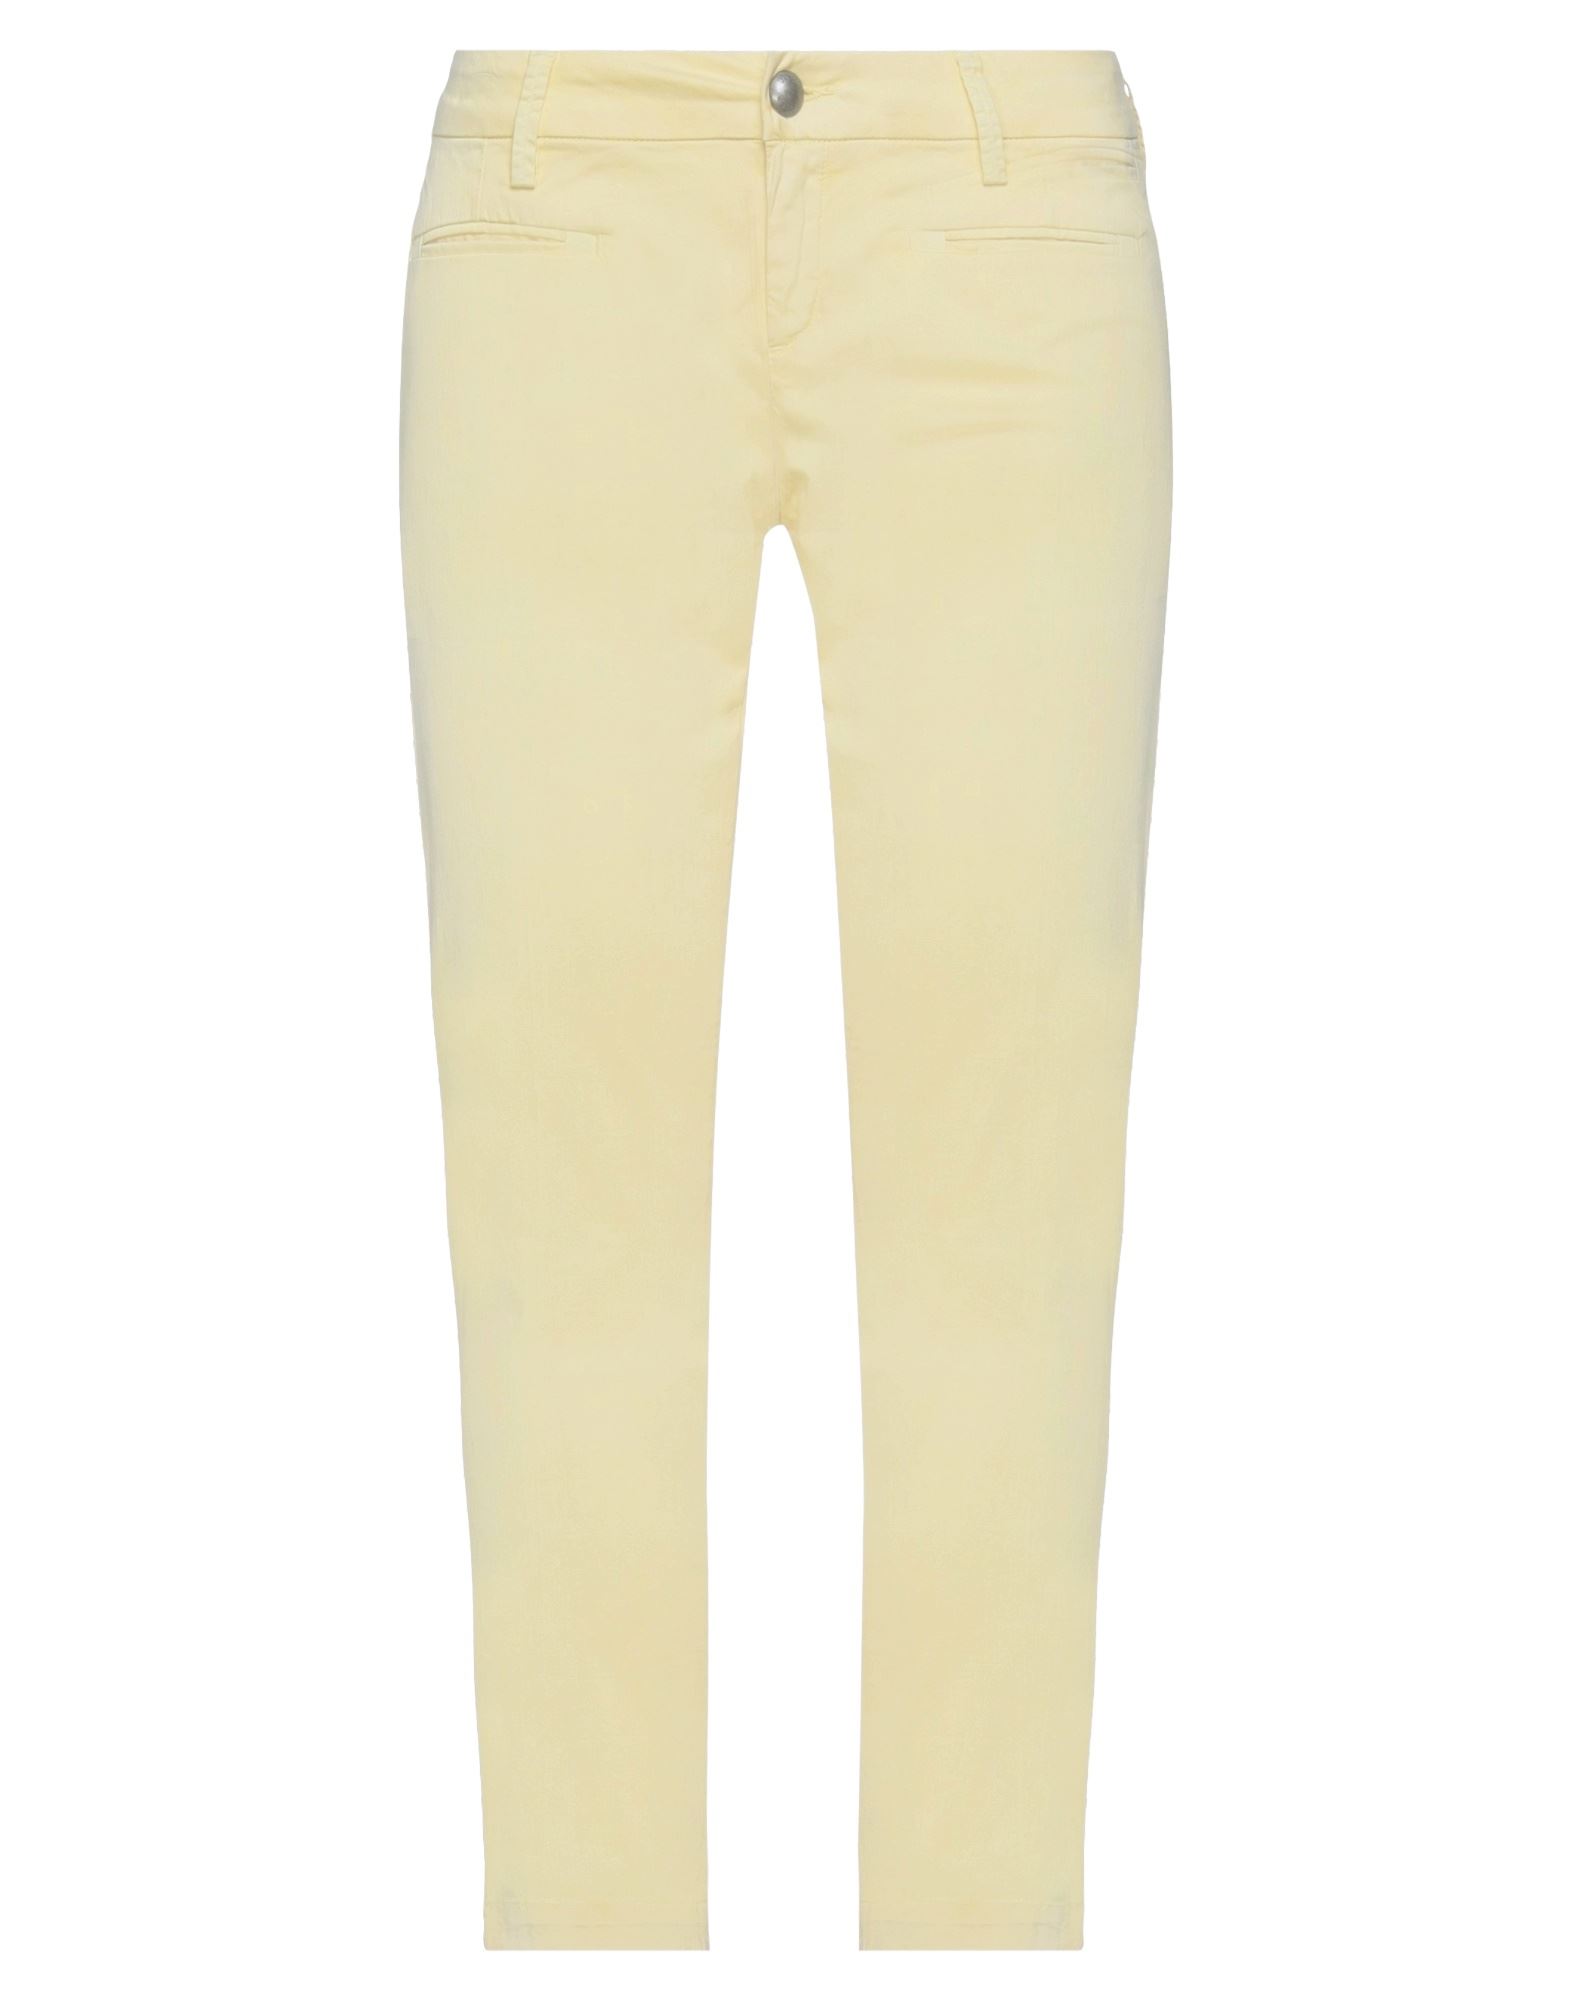 JACOB COHЁN CROPPED PANTS,13119161AD 7